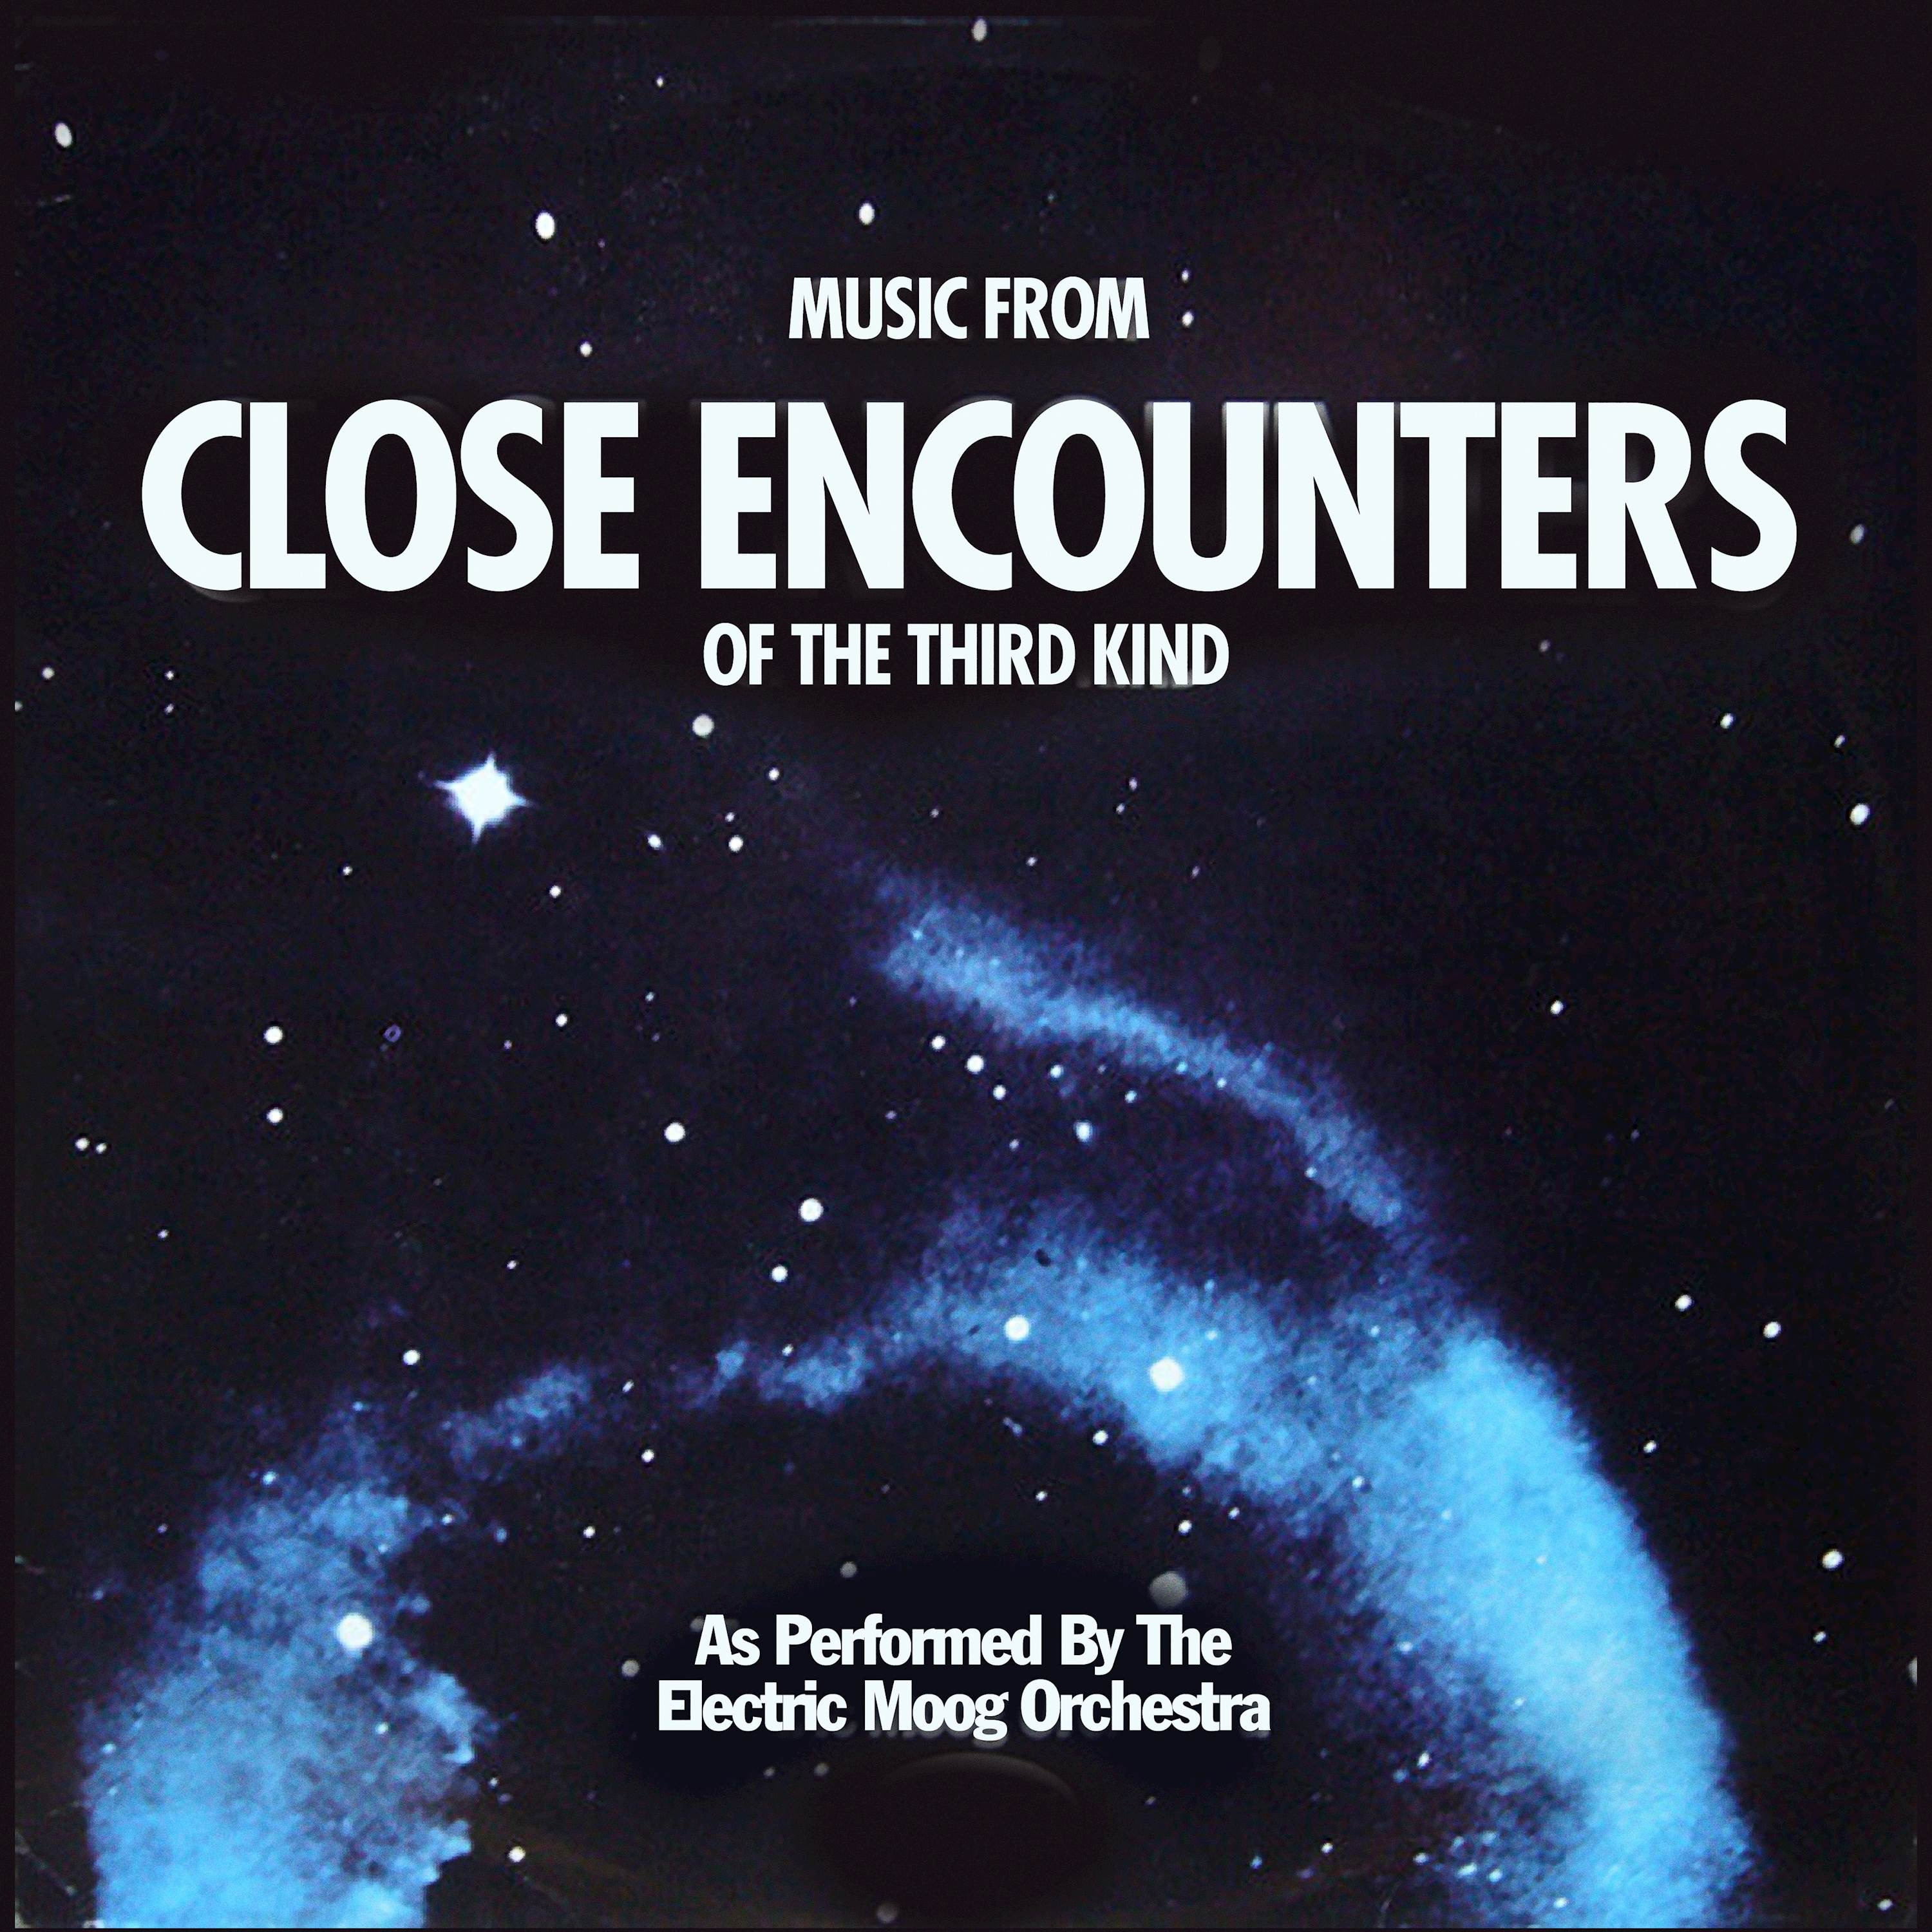 Close music. Close encounters of the third kind. Close encounters. Third kind records. Galaxy Orchestra.